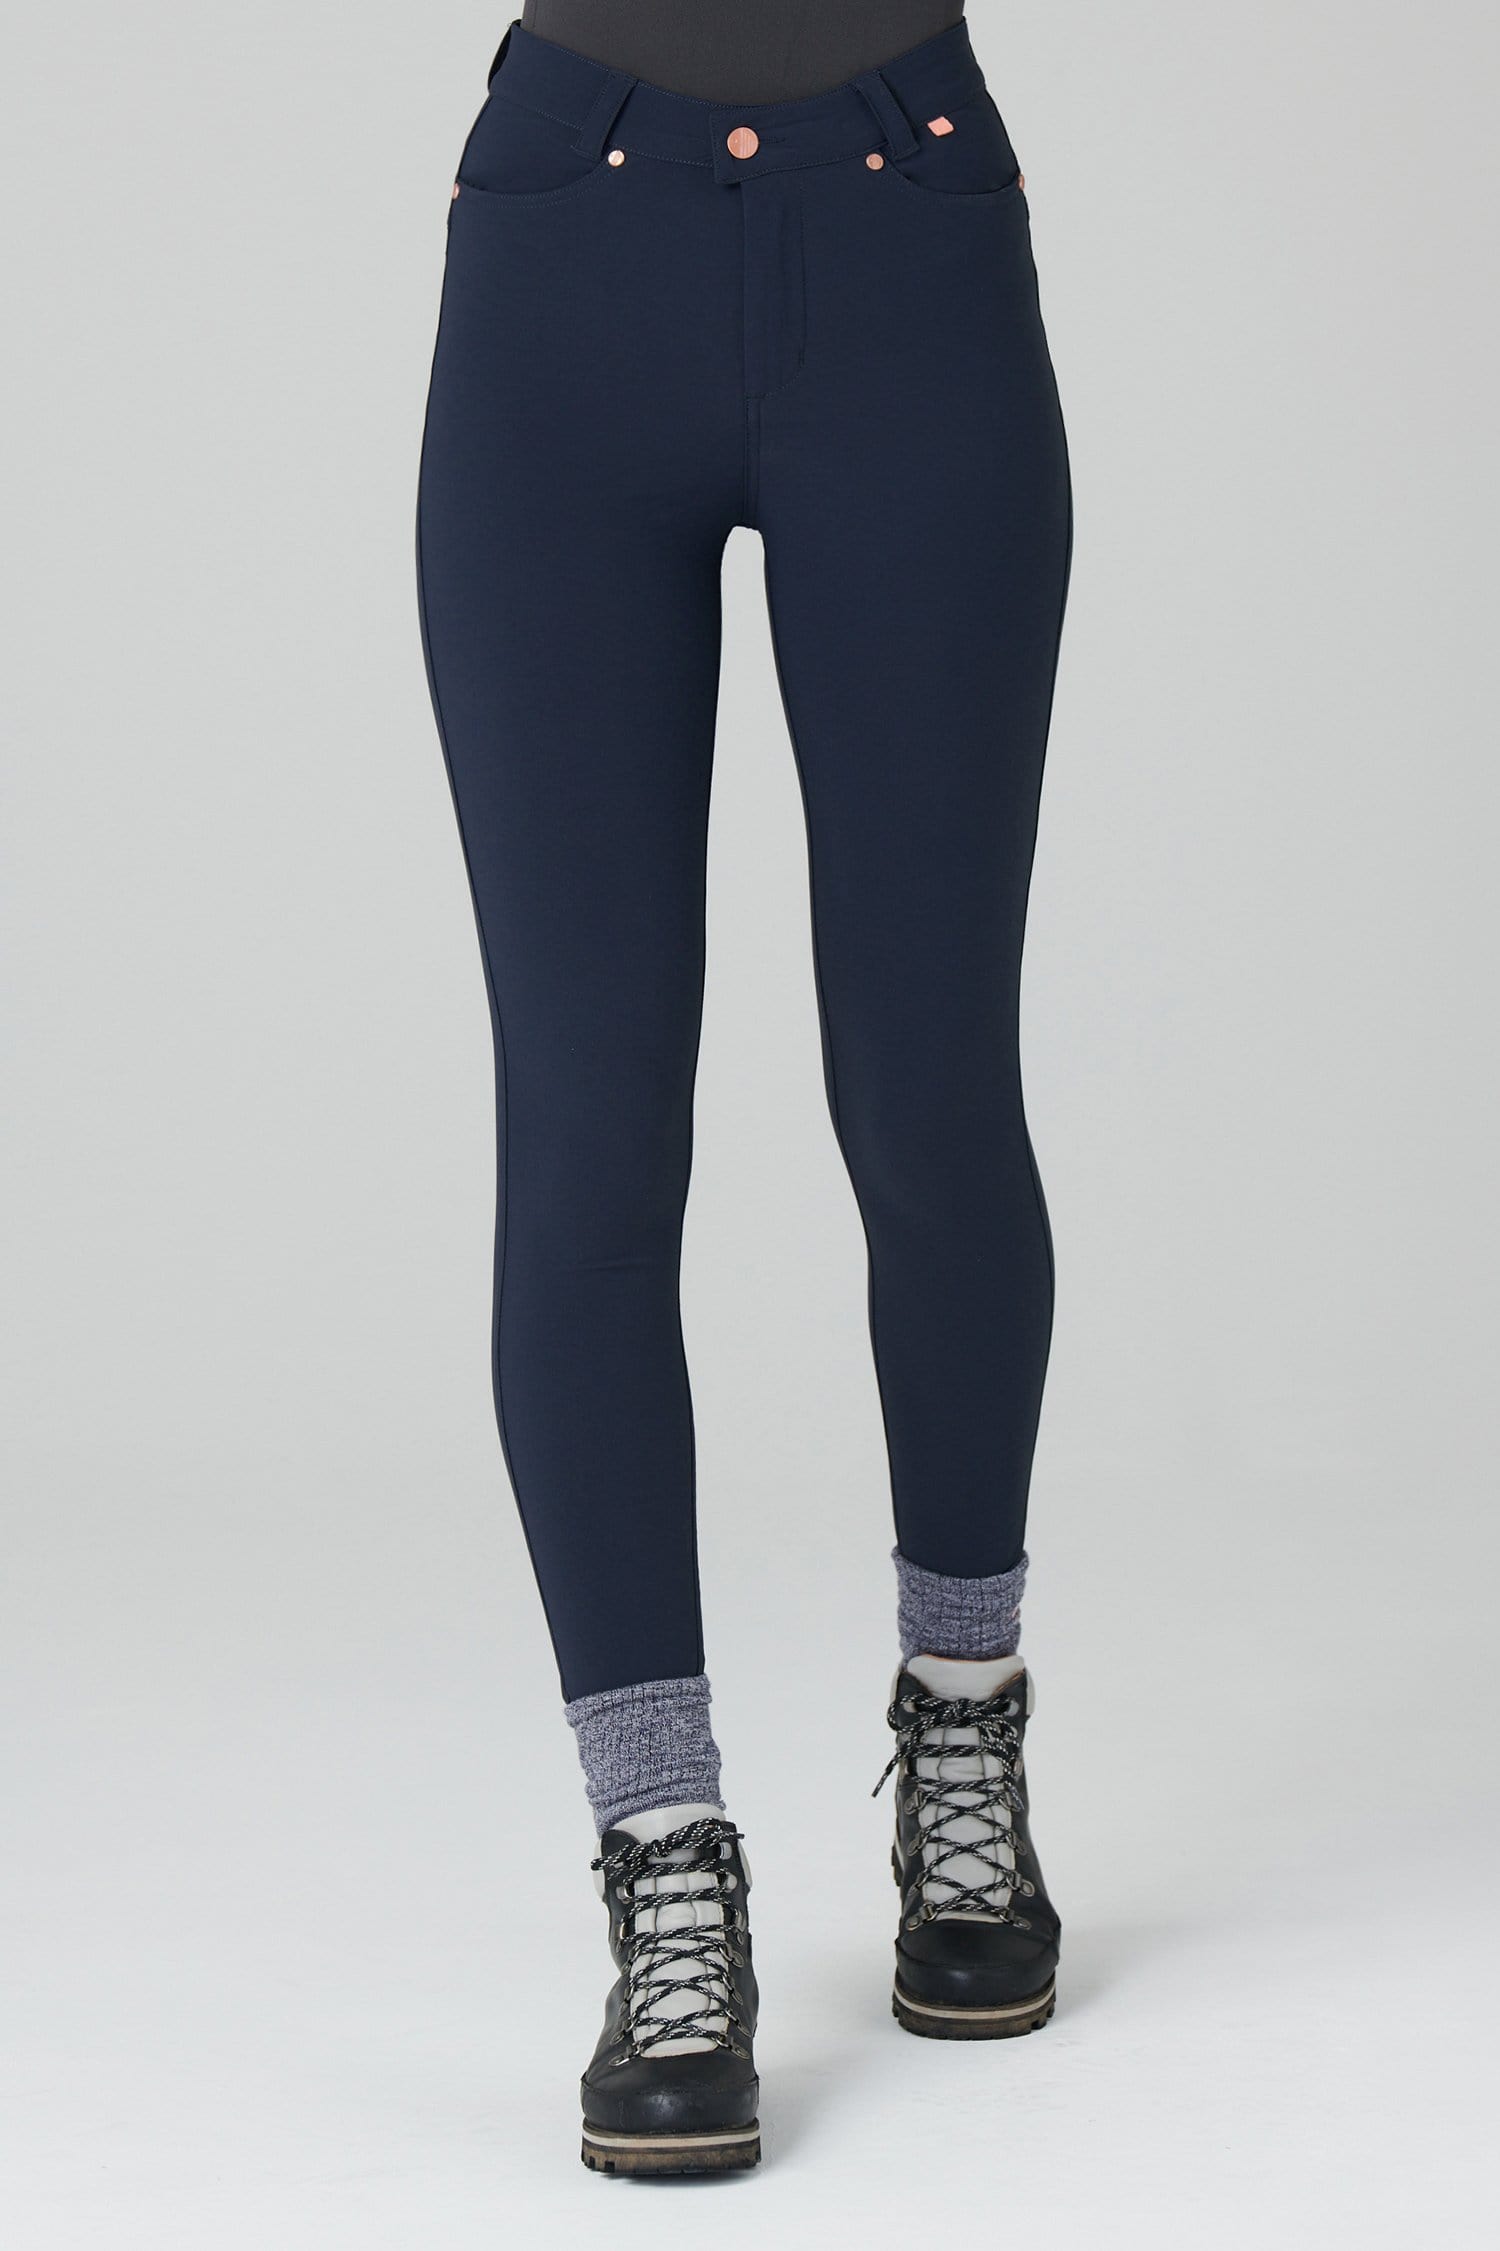 Thermal Skinny Outdoor Trousers - Deep Navy - 38l / Uk20 - Womens - Acai Outdoorwear